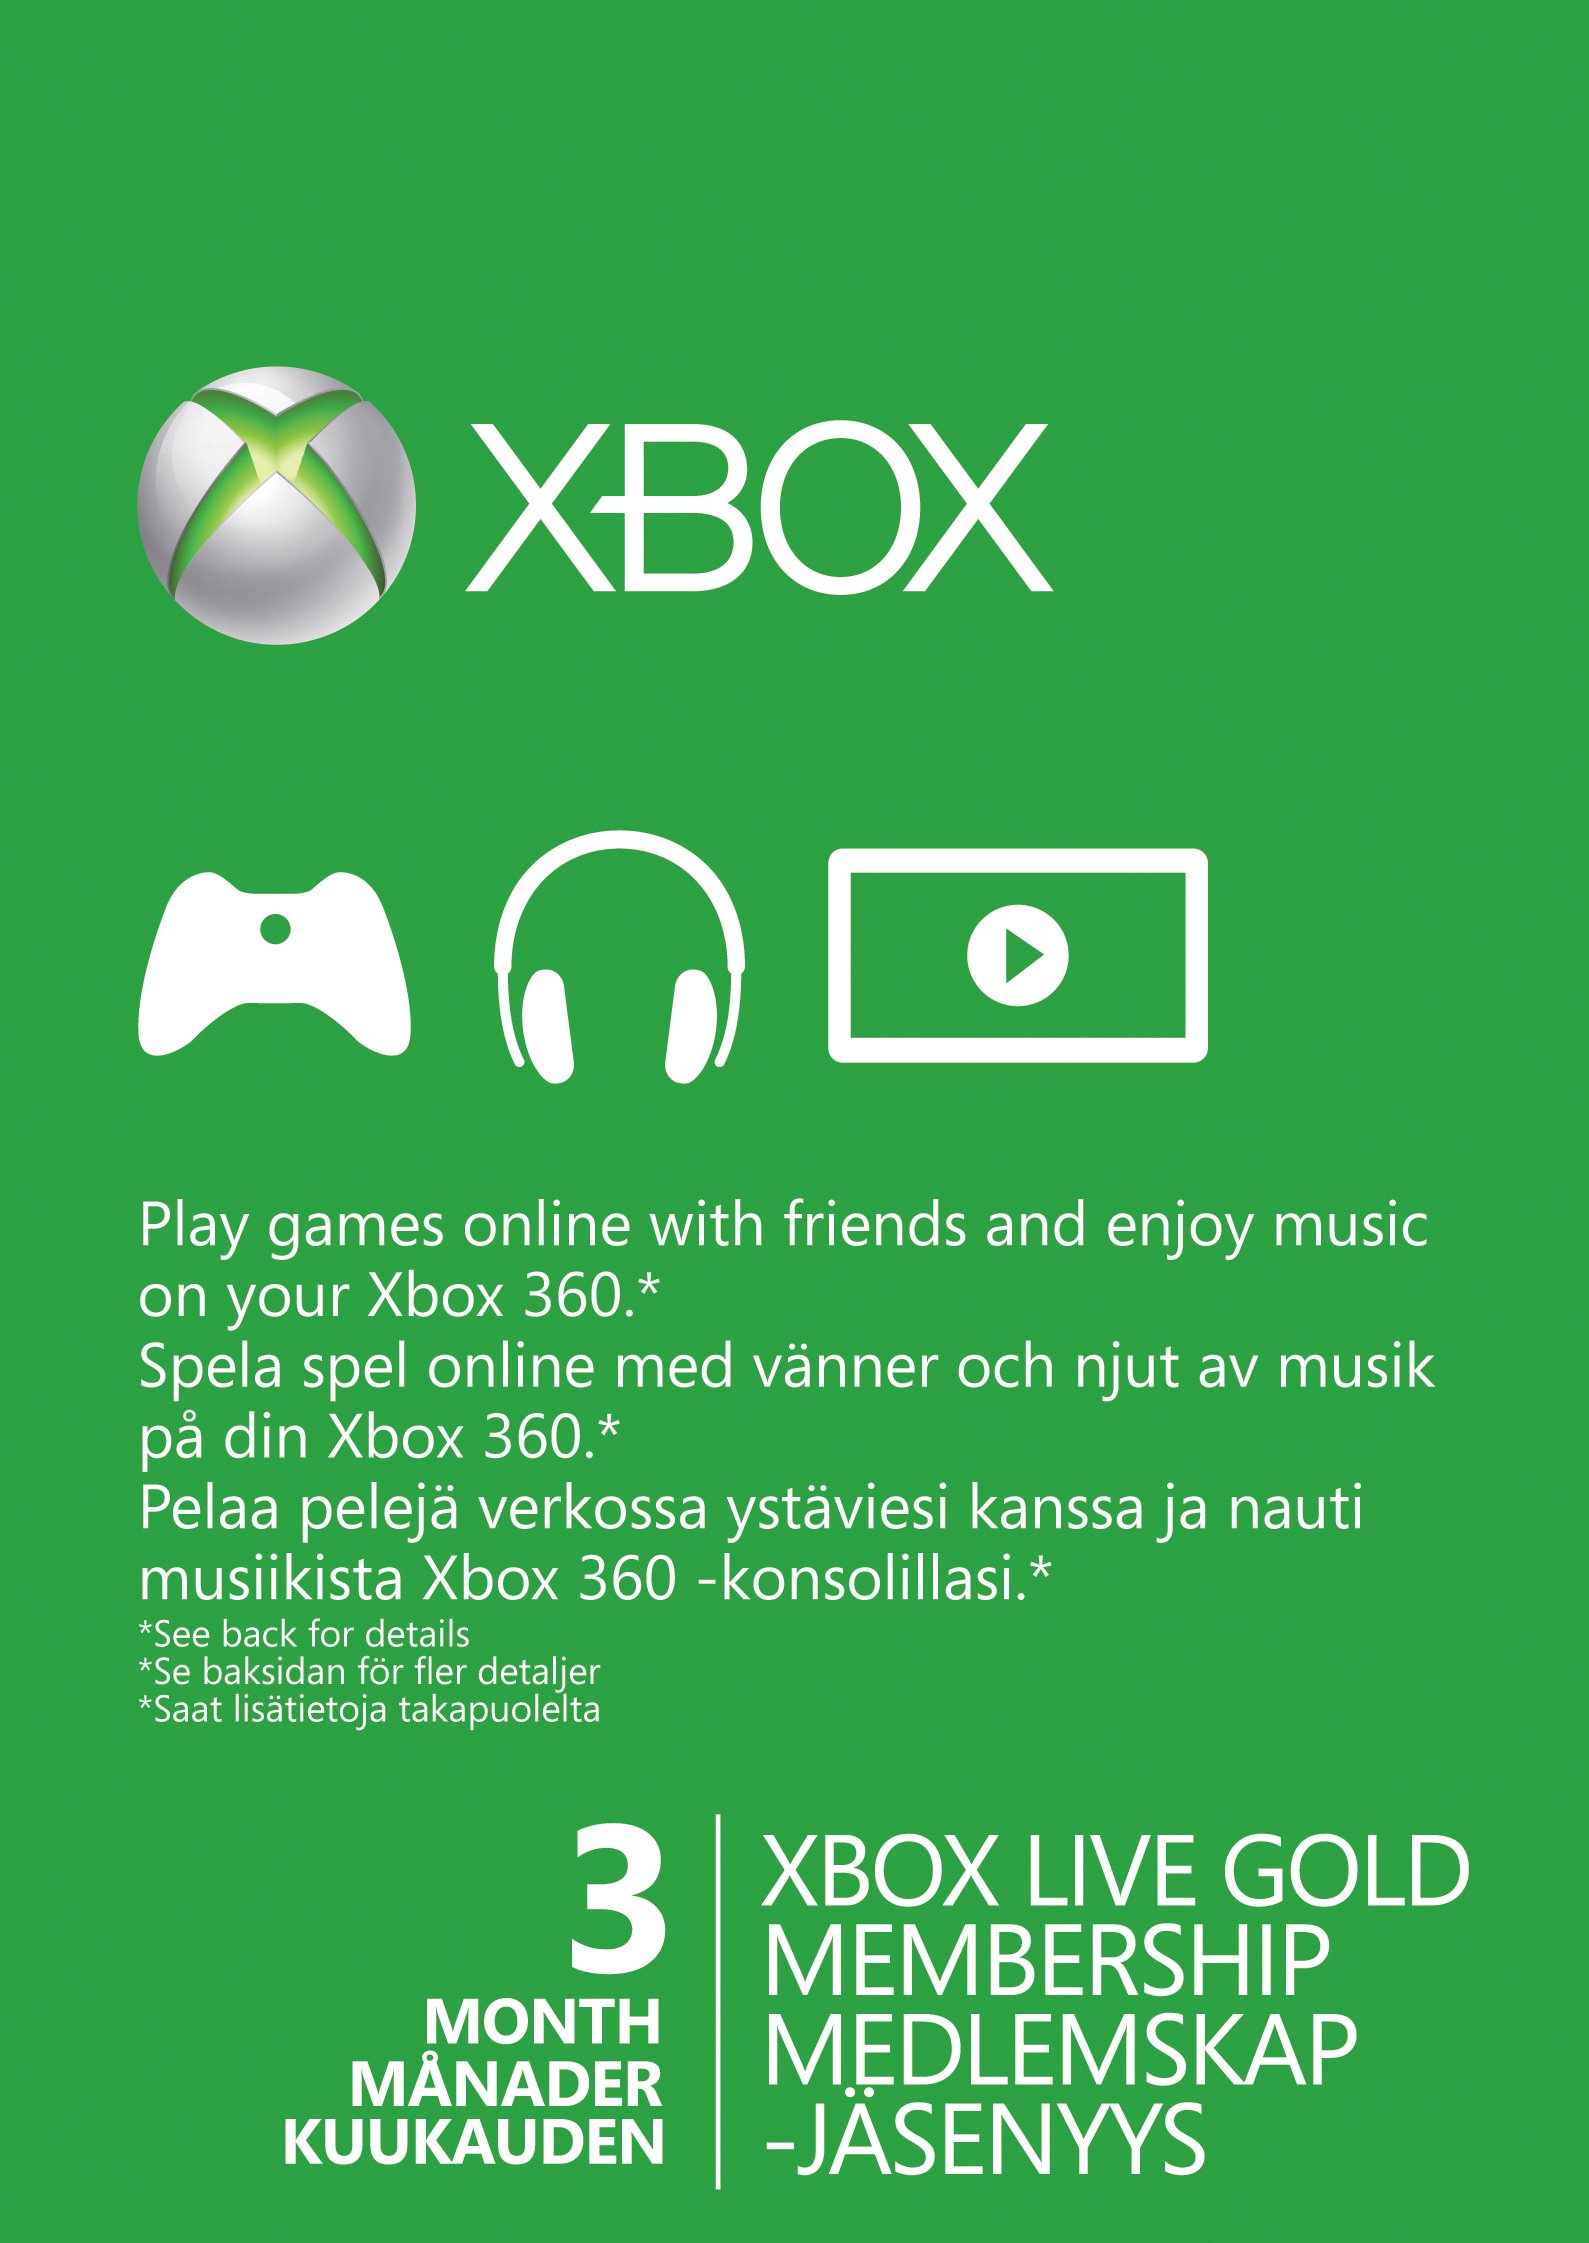 xbox one gold pricing family share